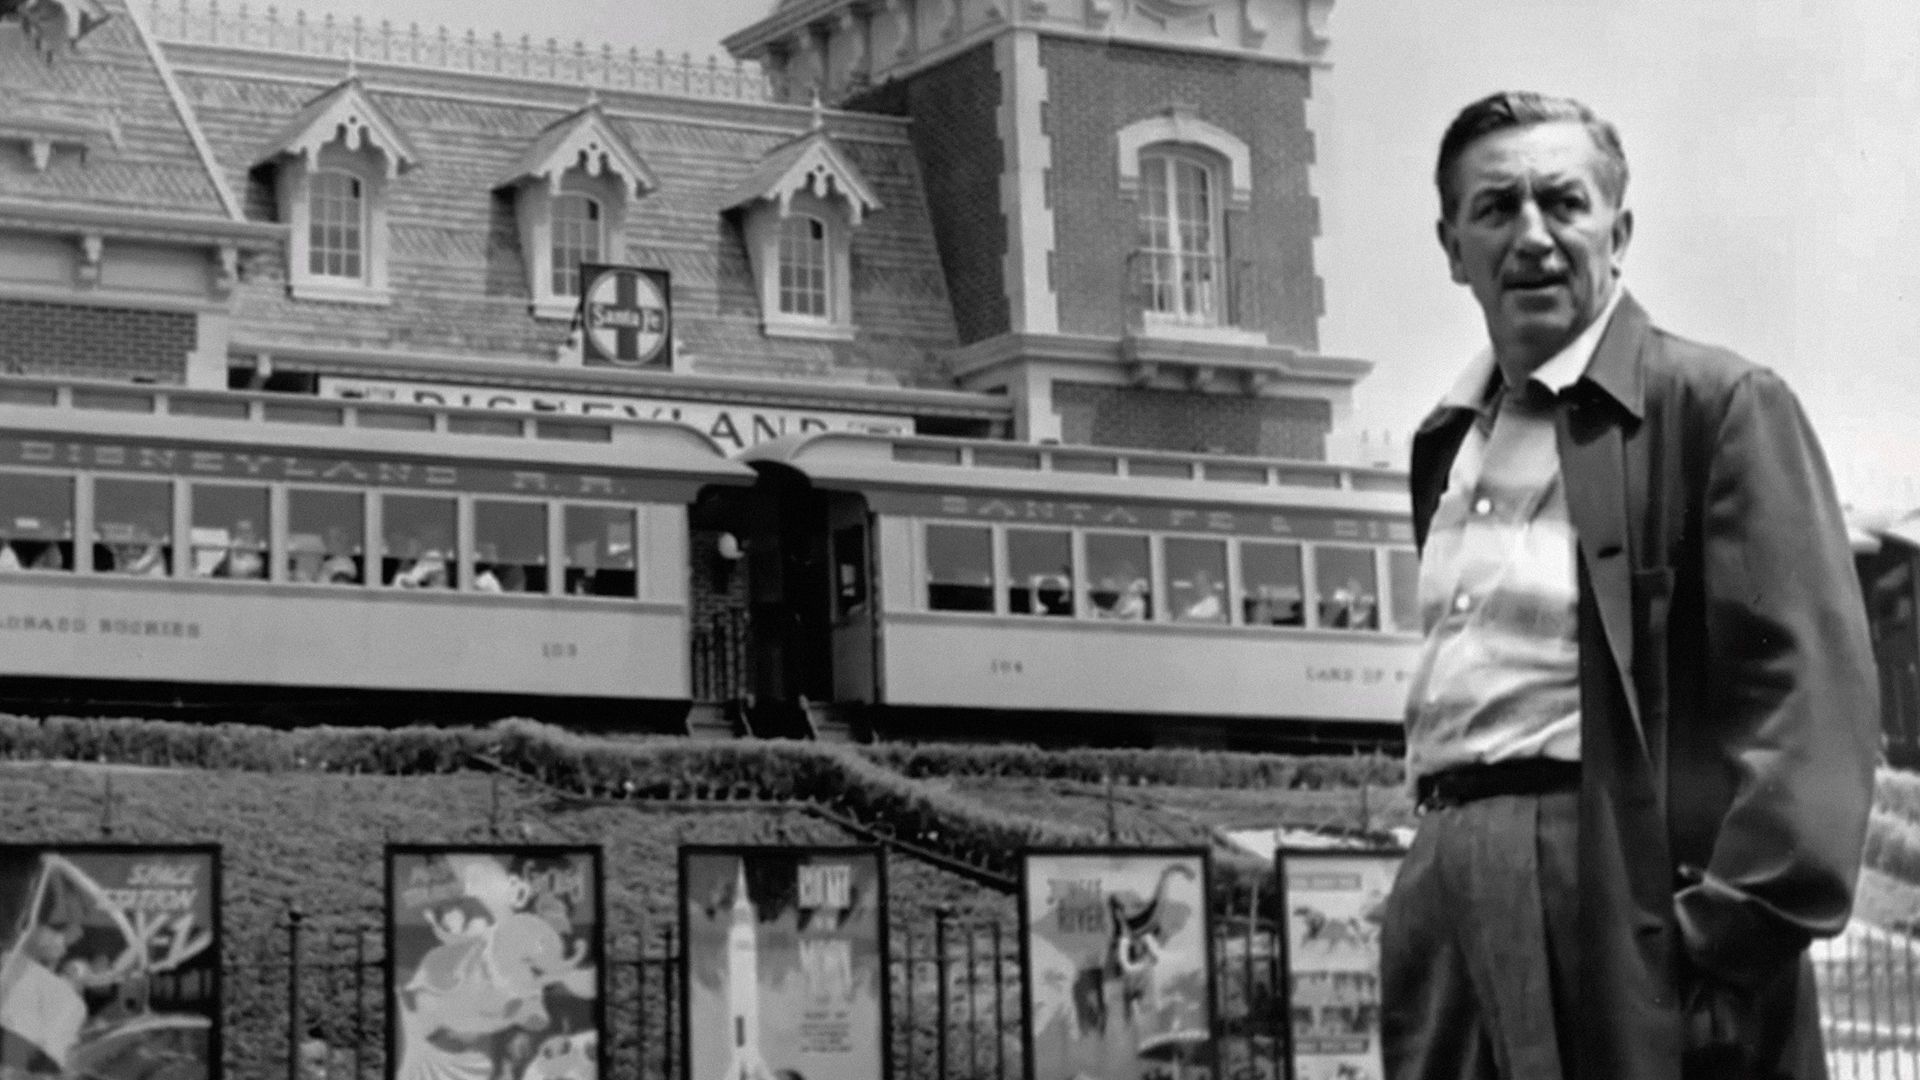 The Imagineering Story background